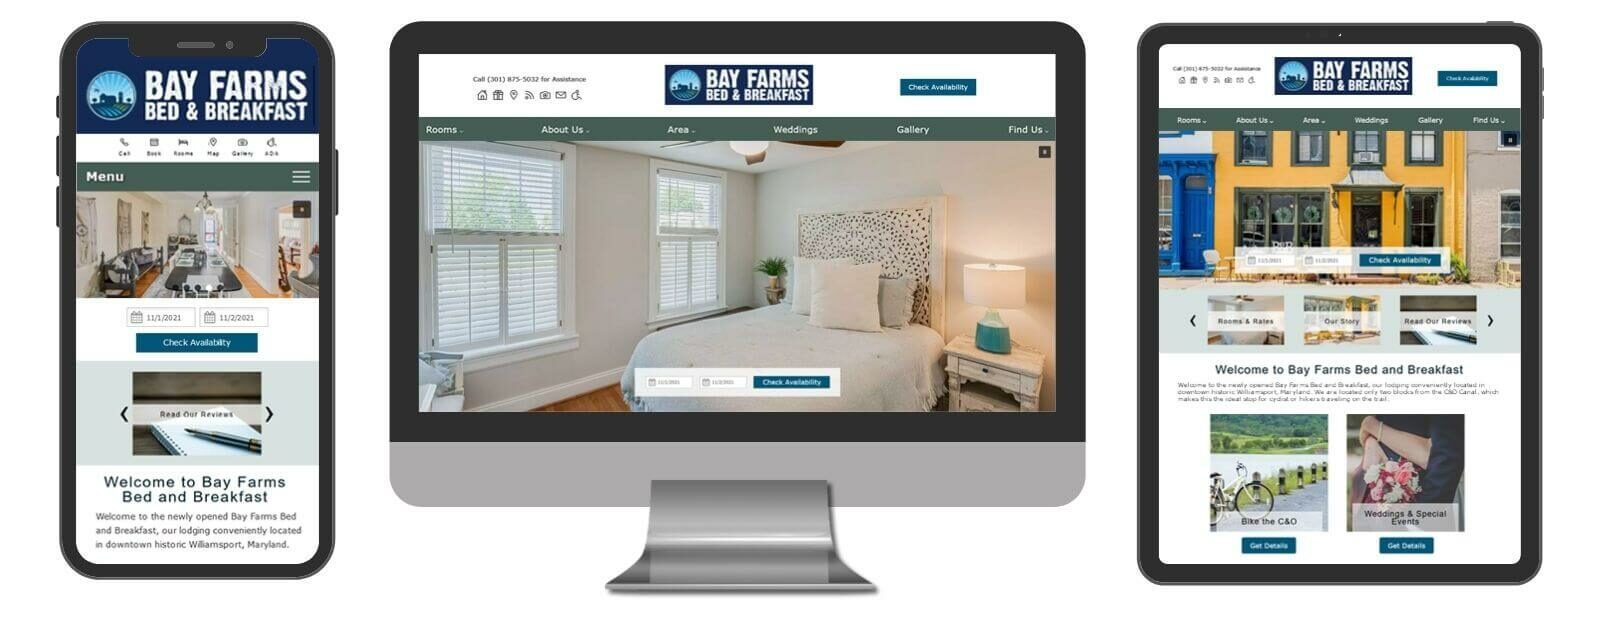 Bay Farms Bed and Breakfast website displayed in 3 sizes - mobile, template and desktop